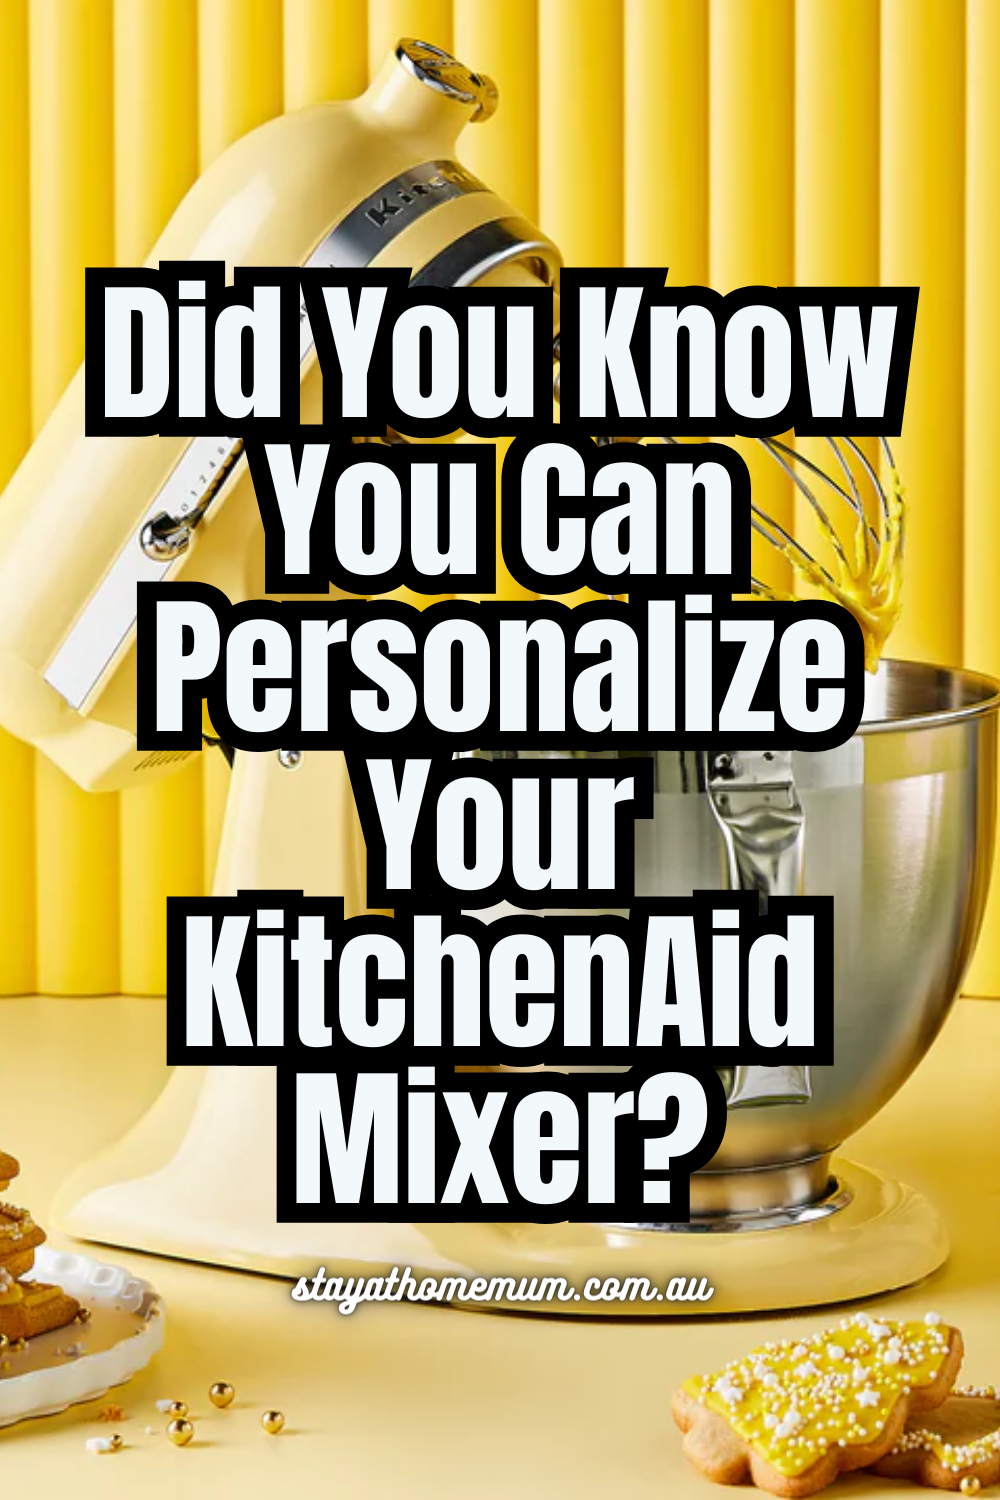 Did You Know You Can Personalize Your KitchenAid Mixer? Pinnable